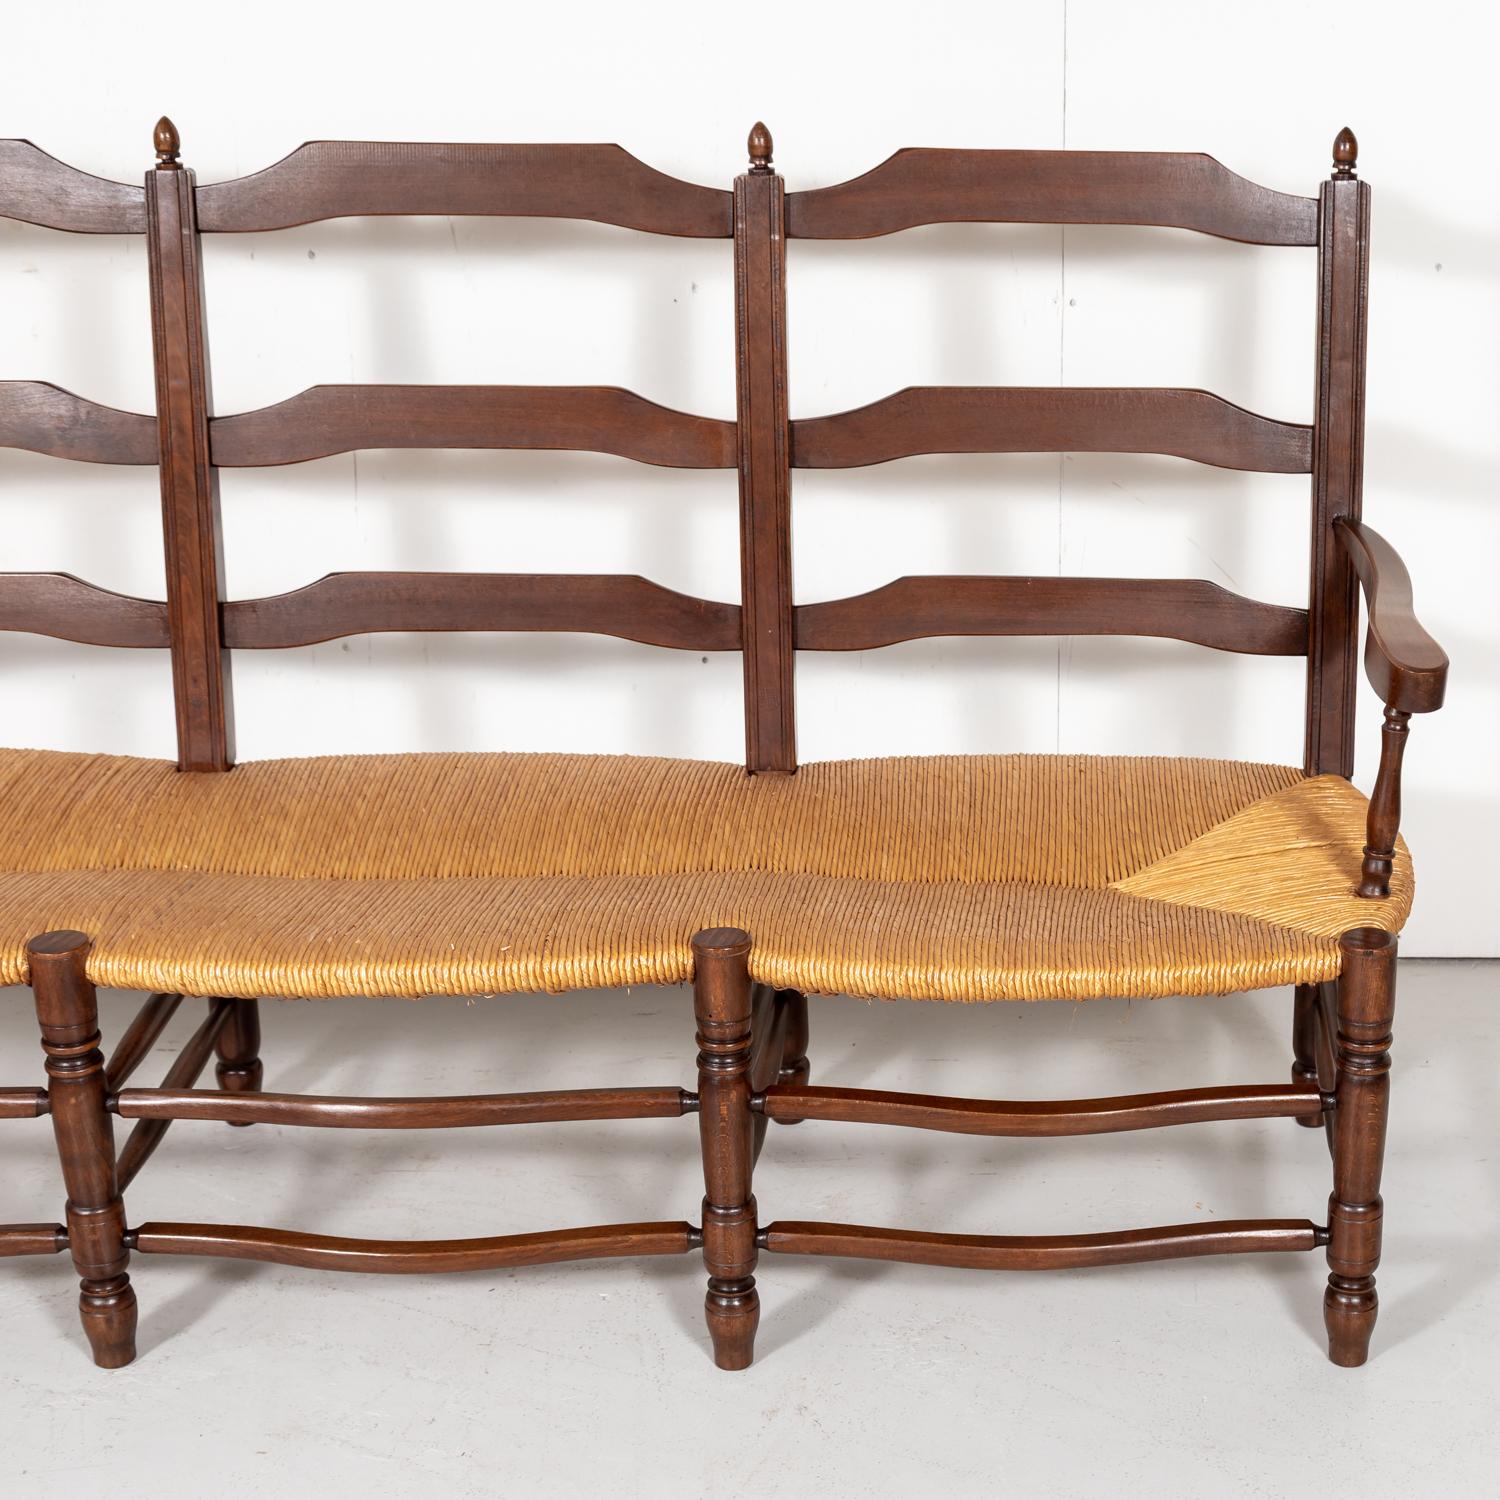 Country French Ladder-Back Walnut Settee or Radassier with Rush Seat 2